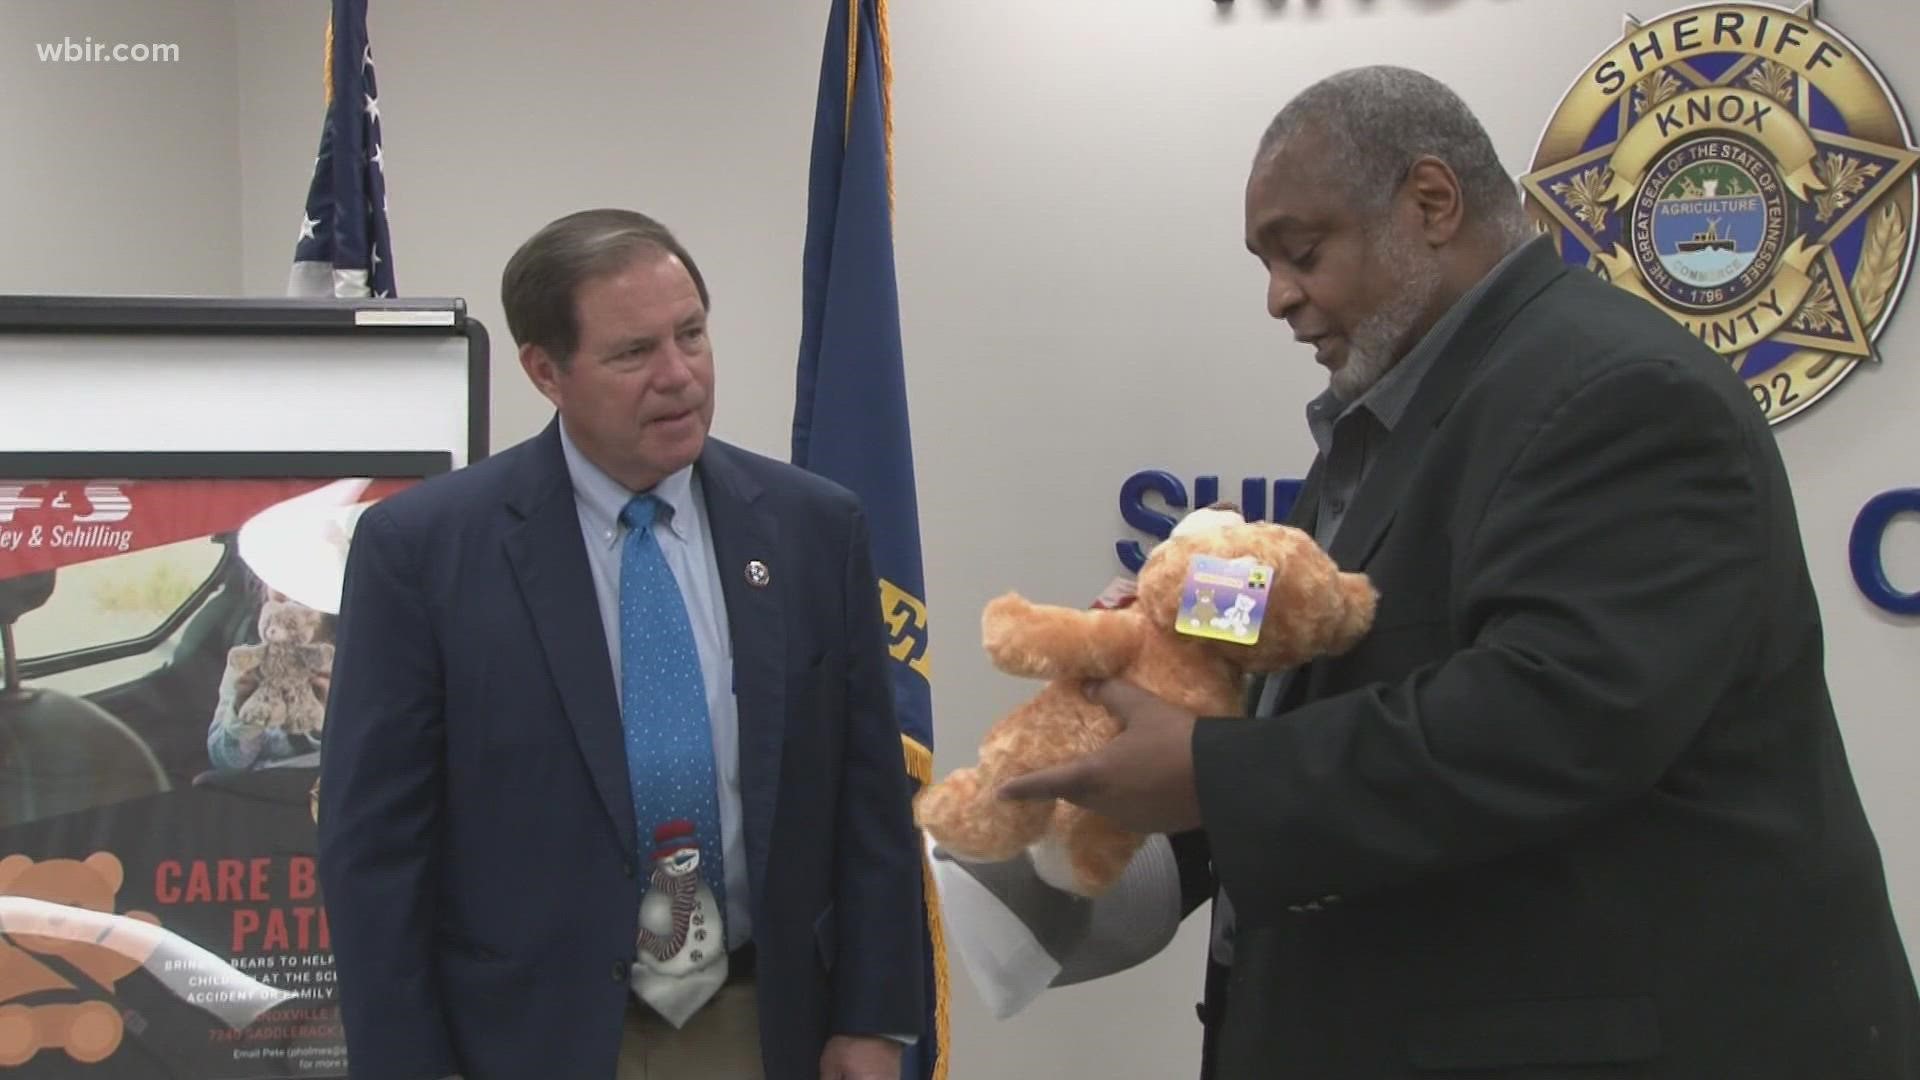 Frayley & Schilling trucking donated Teddy Bears to the Knox Co. Sheriff's Office Care Bear patrol program. Dec. 1, 2021-4pm.